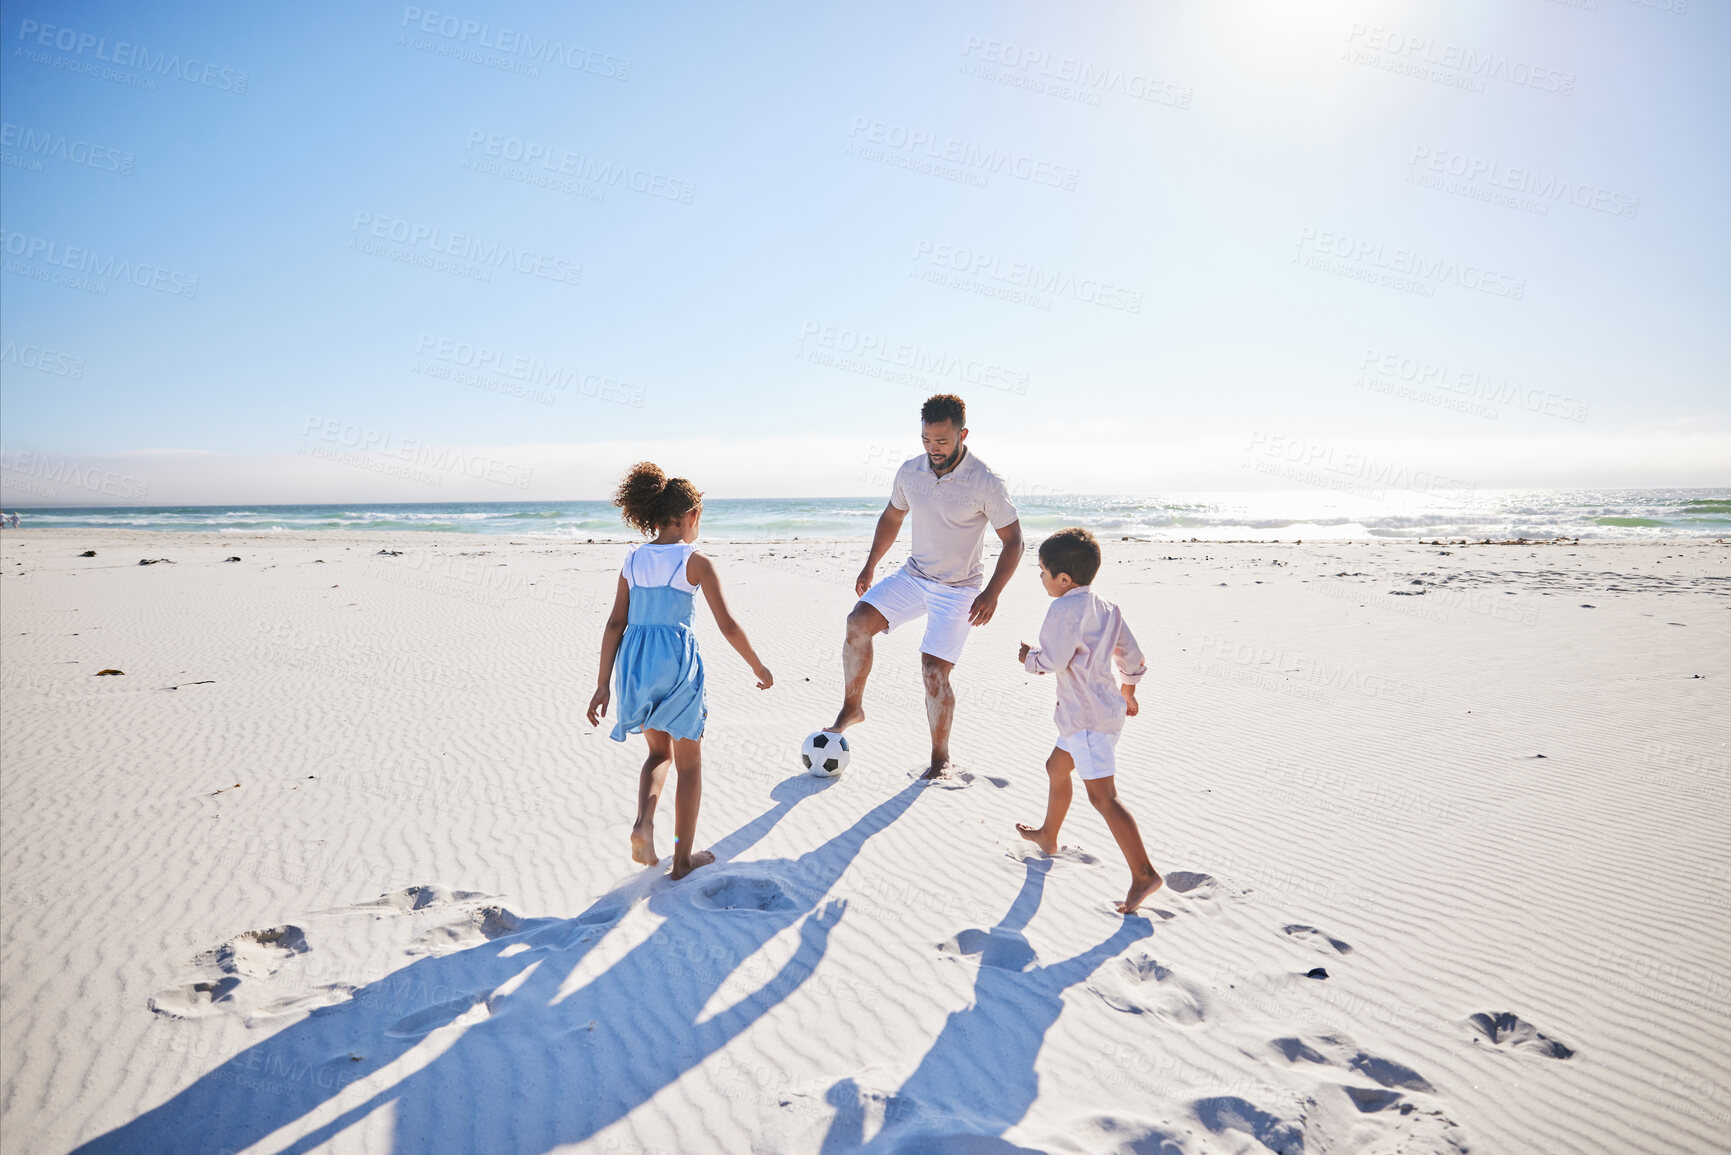 Buy stock photo Carefree father and two children playing soccer on the beach. Single dad having fun and kicking ball with his little daughter and son while on vacation by the sea